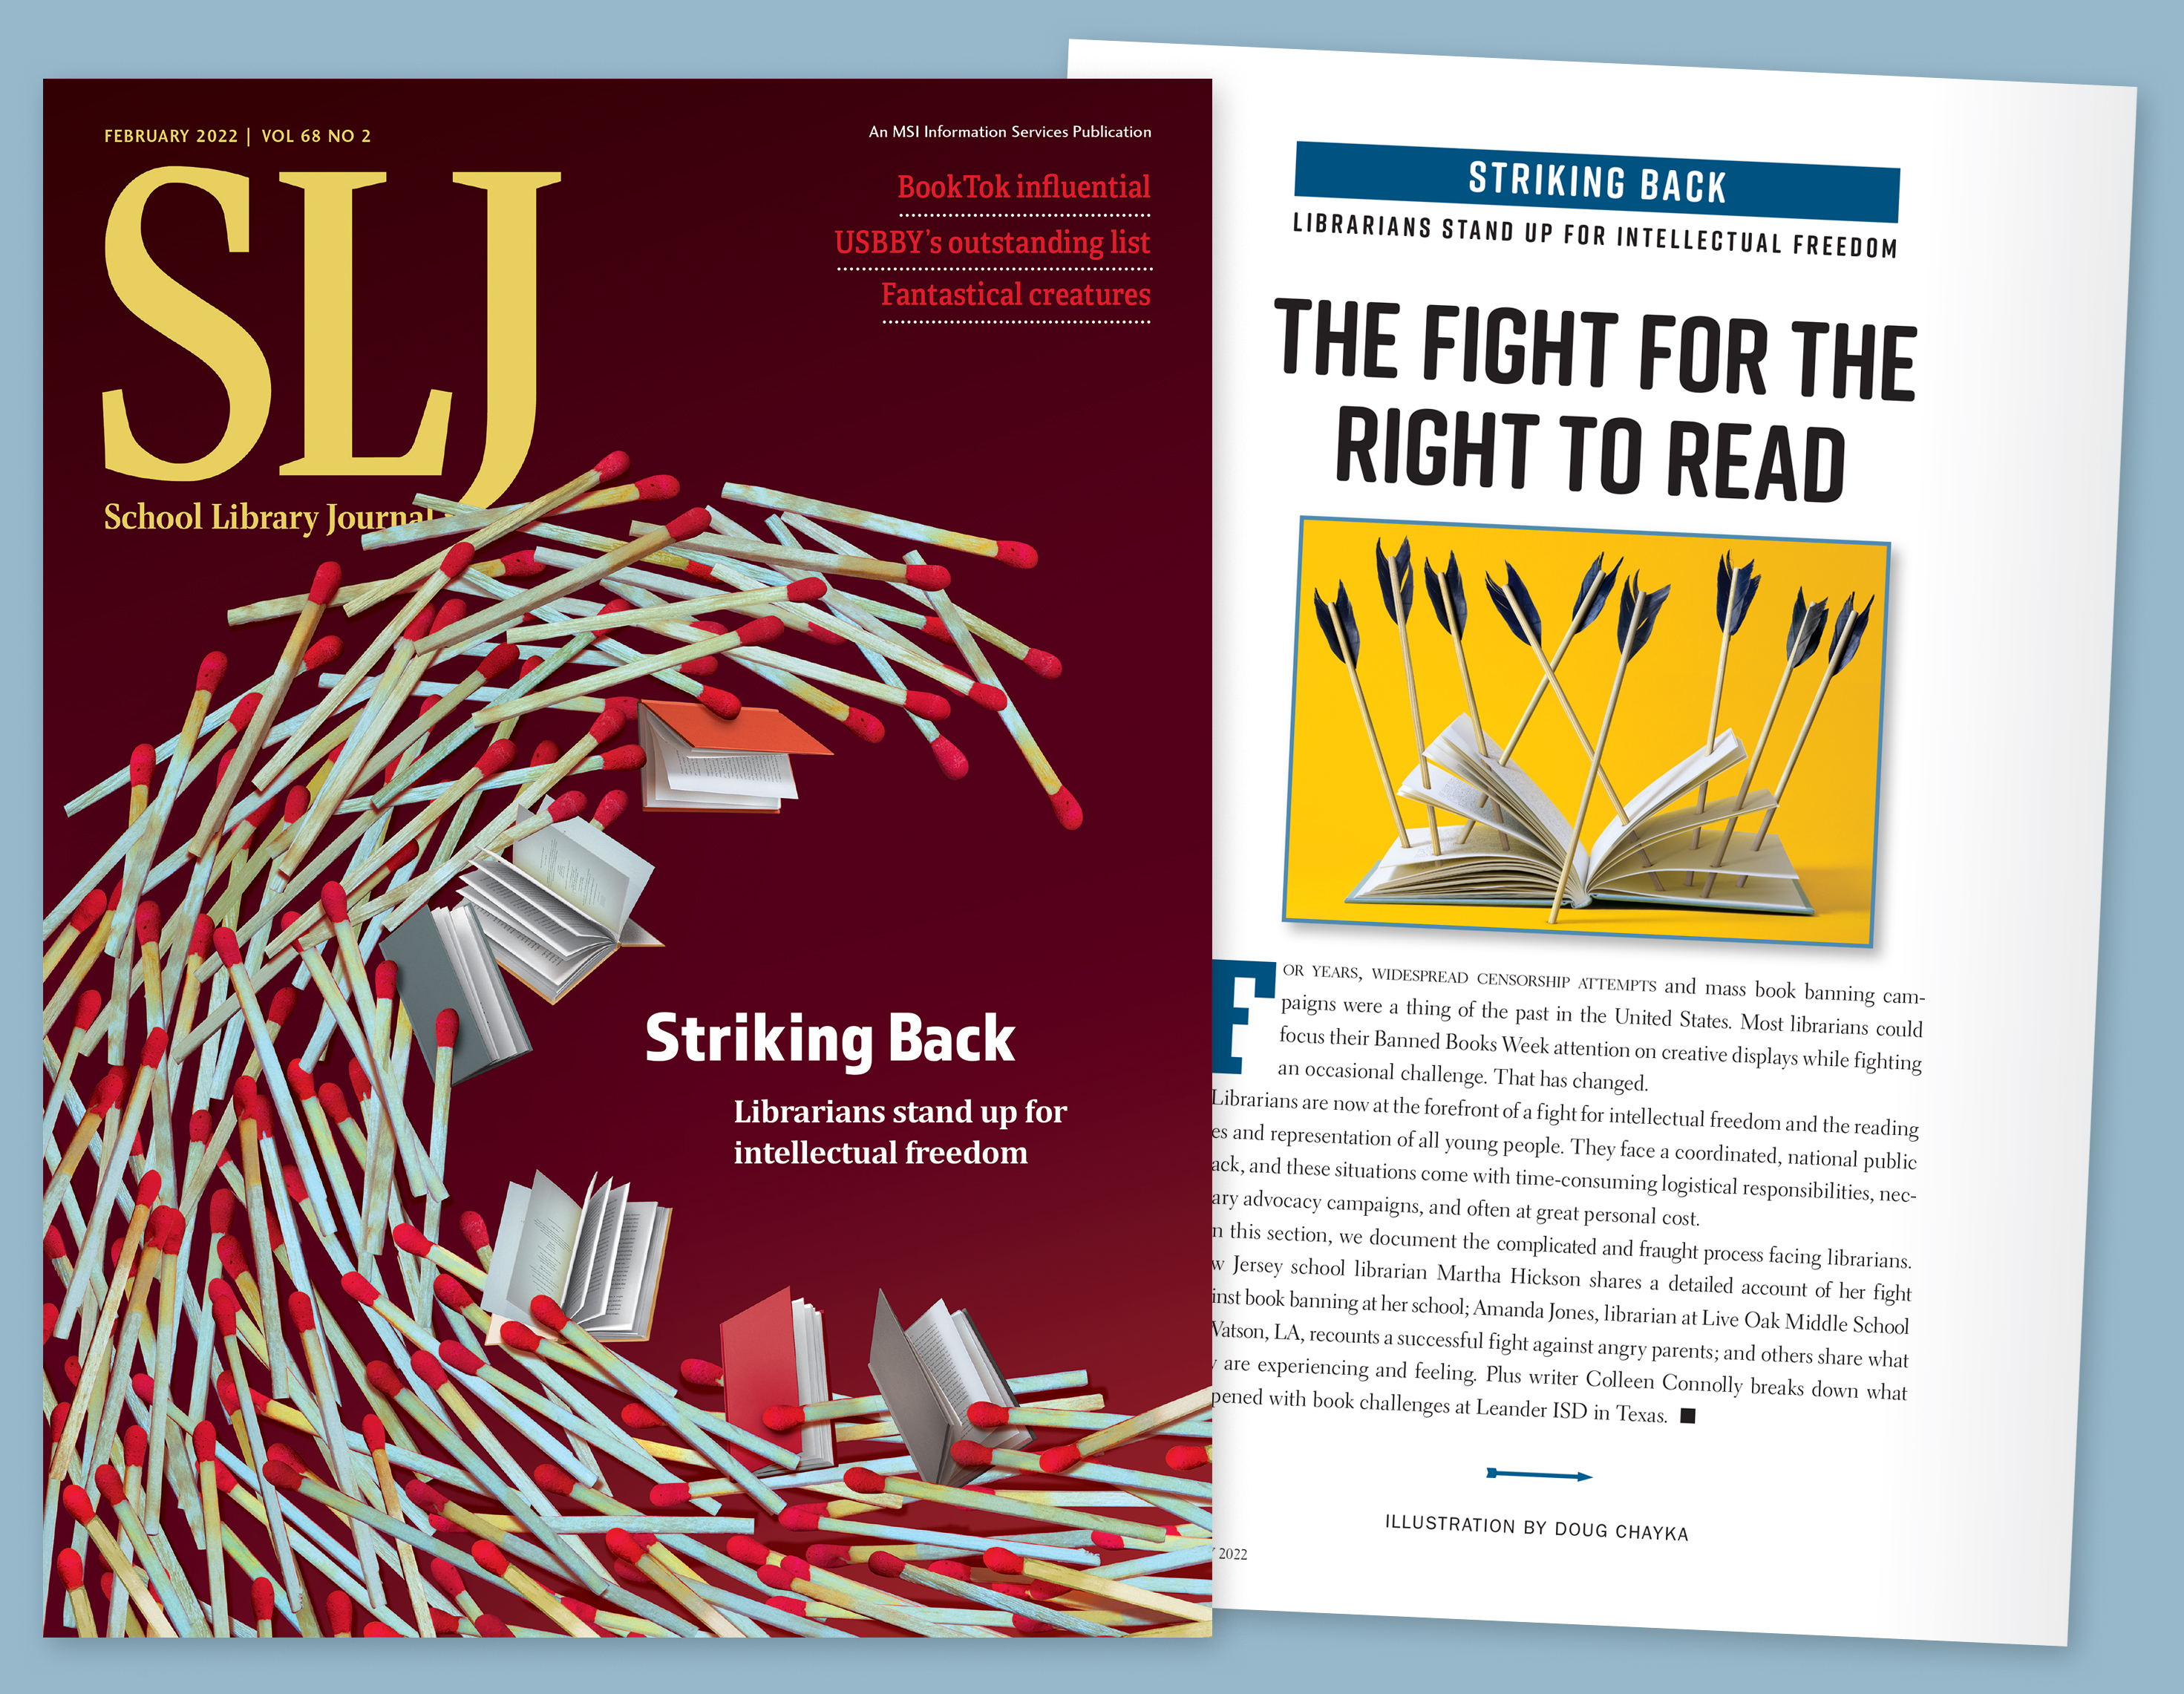 SLJ Is a Finalist for 2022 FOLIO Awards for Editorial and Design Excellence